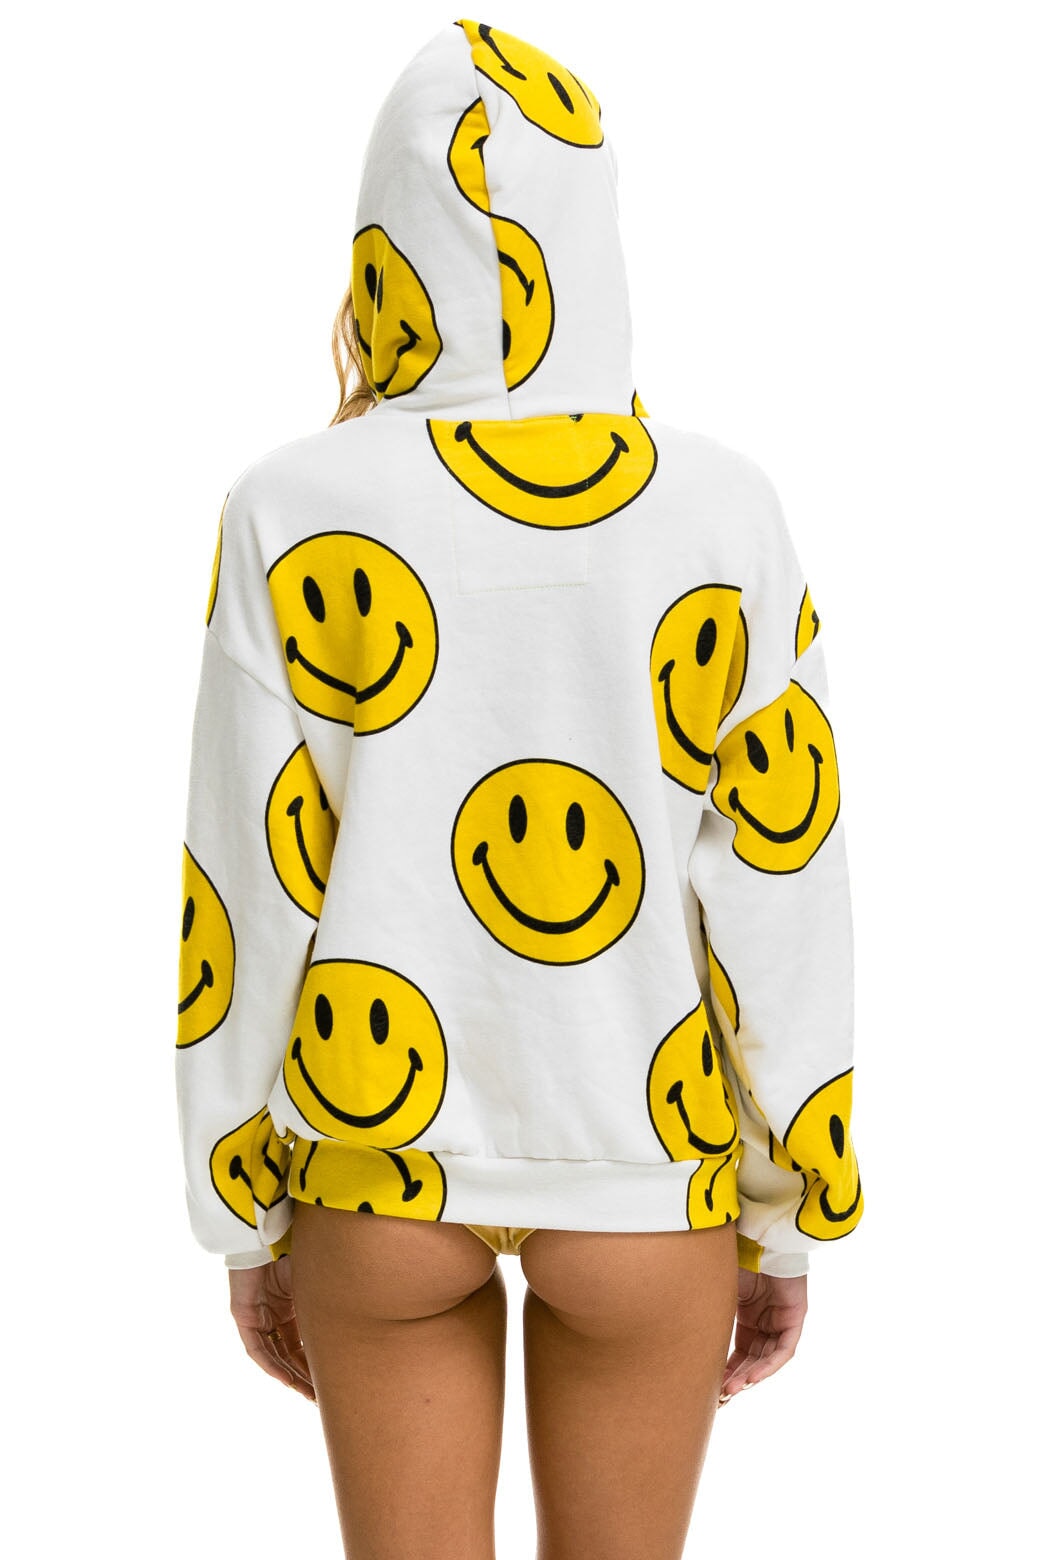 SMILEY REPEAT RELAXED PULLOVER HOODIE - WHITE Hoodie Aviator Nation 